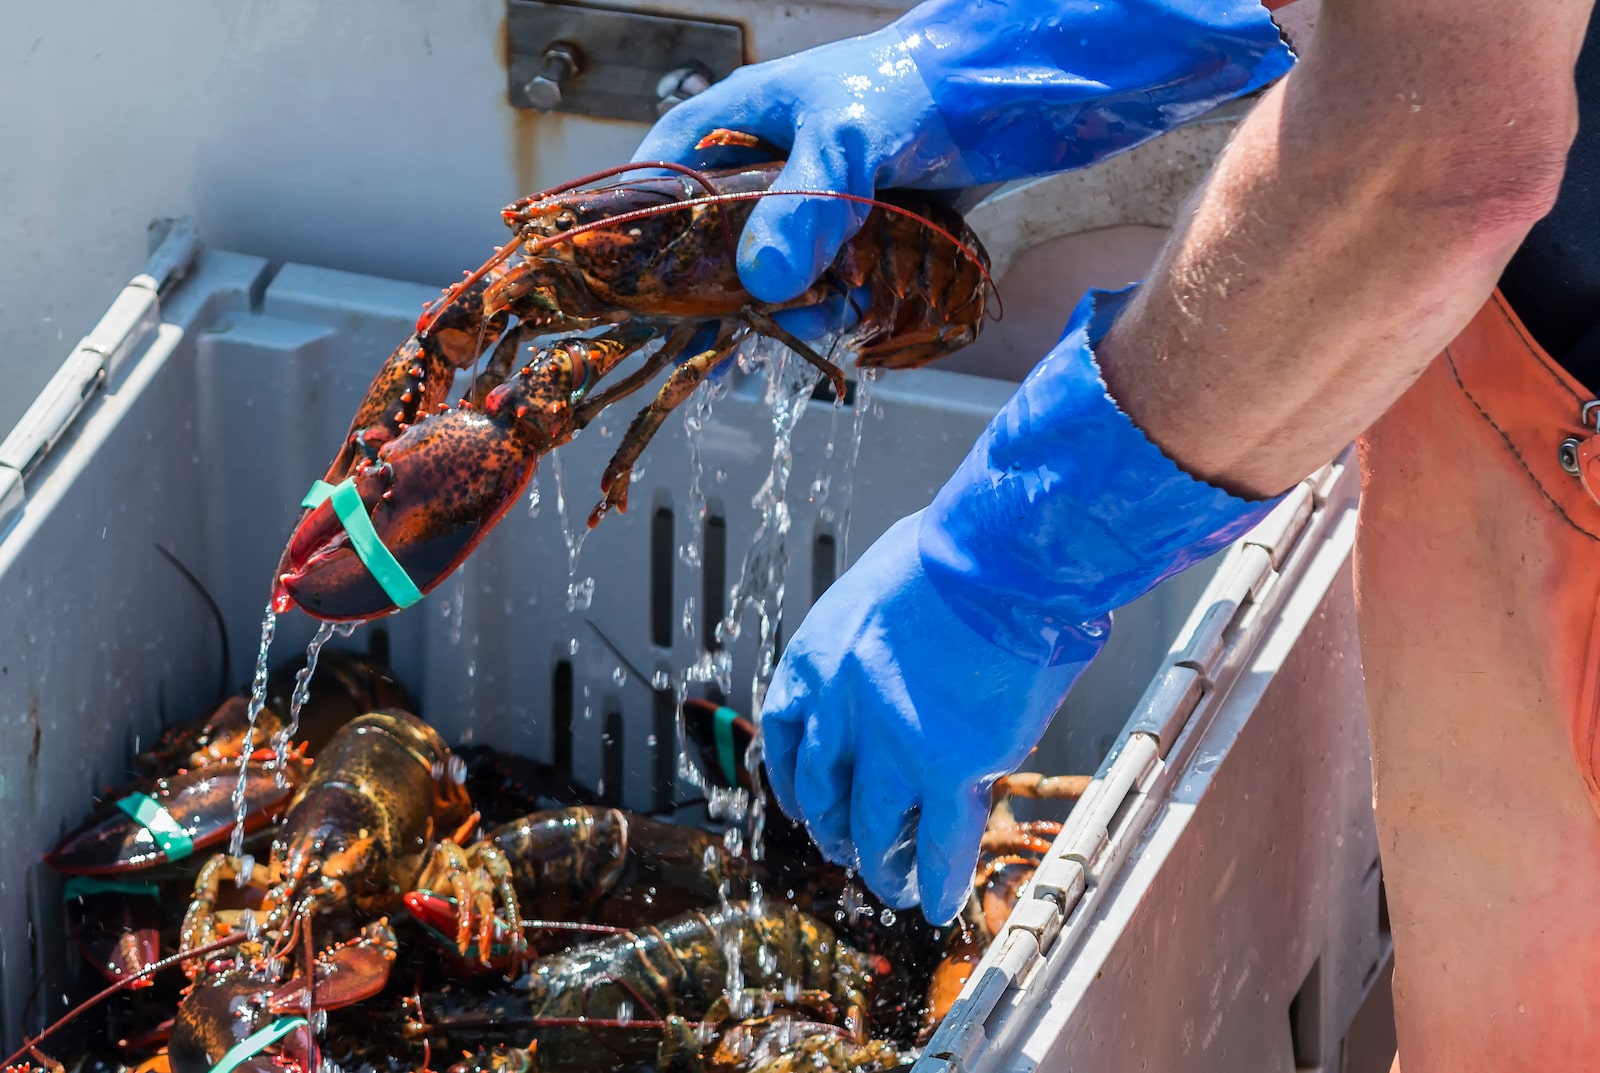 A live lobster has water dripping off of it as a person with gloves places it into bins on a fishing boat.